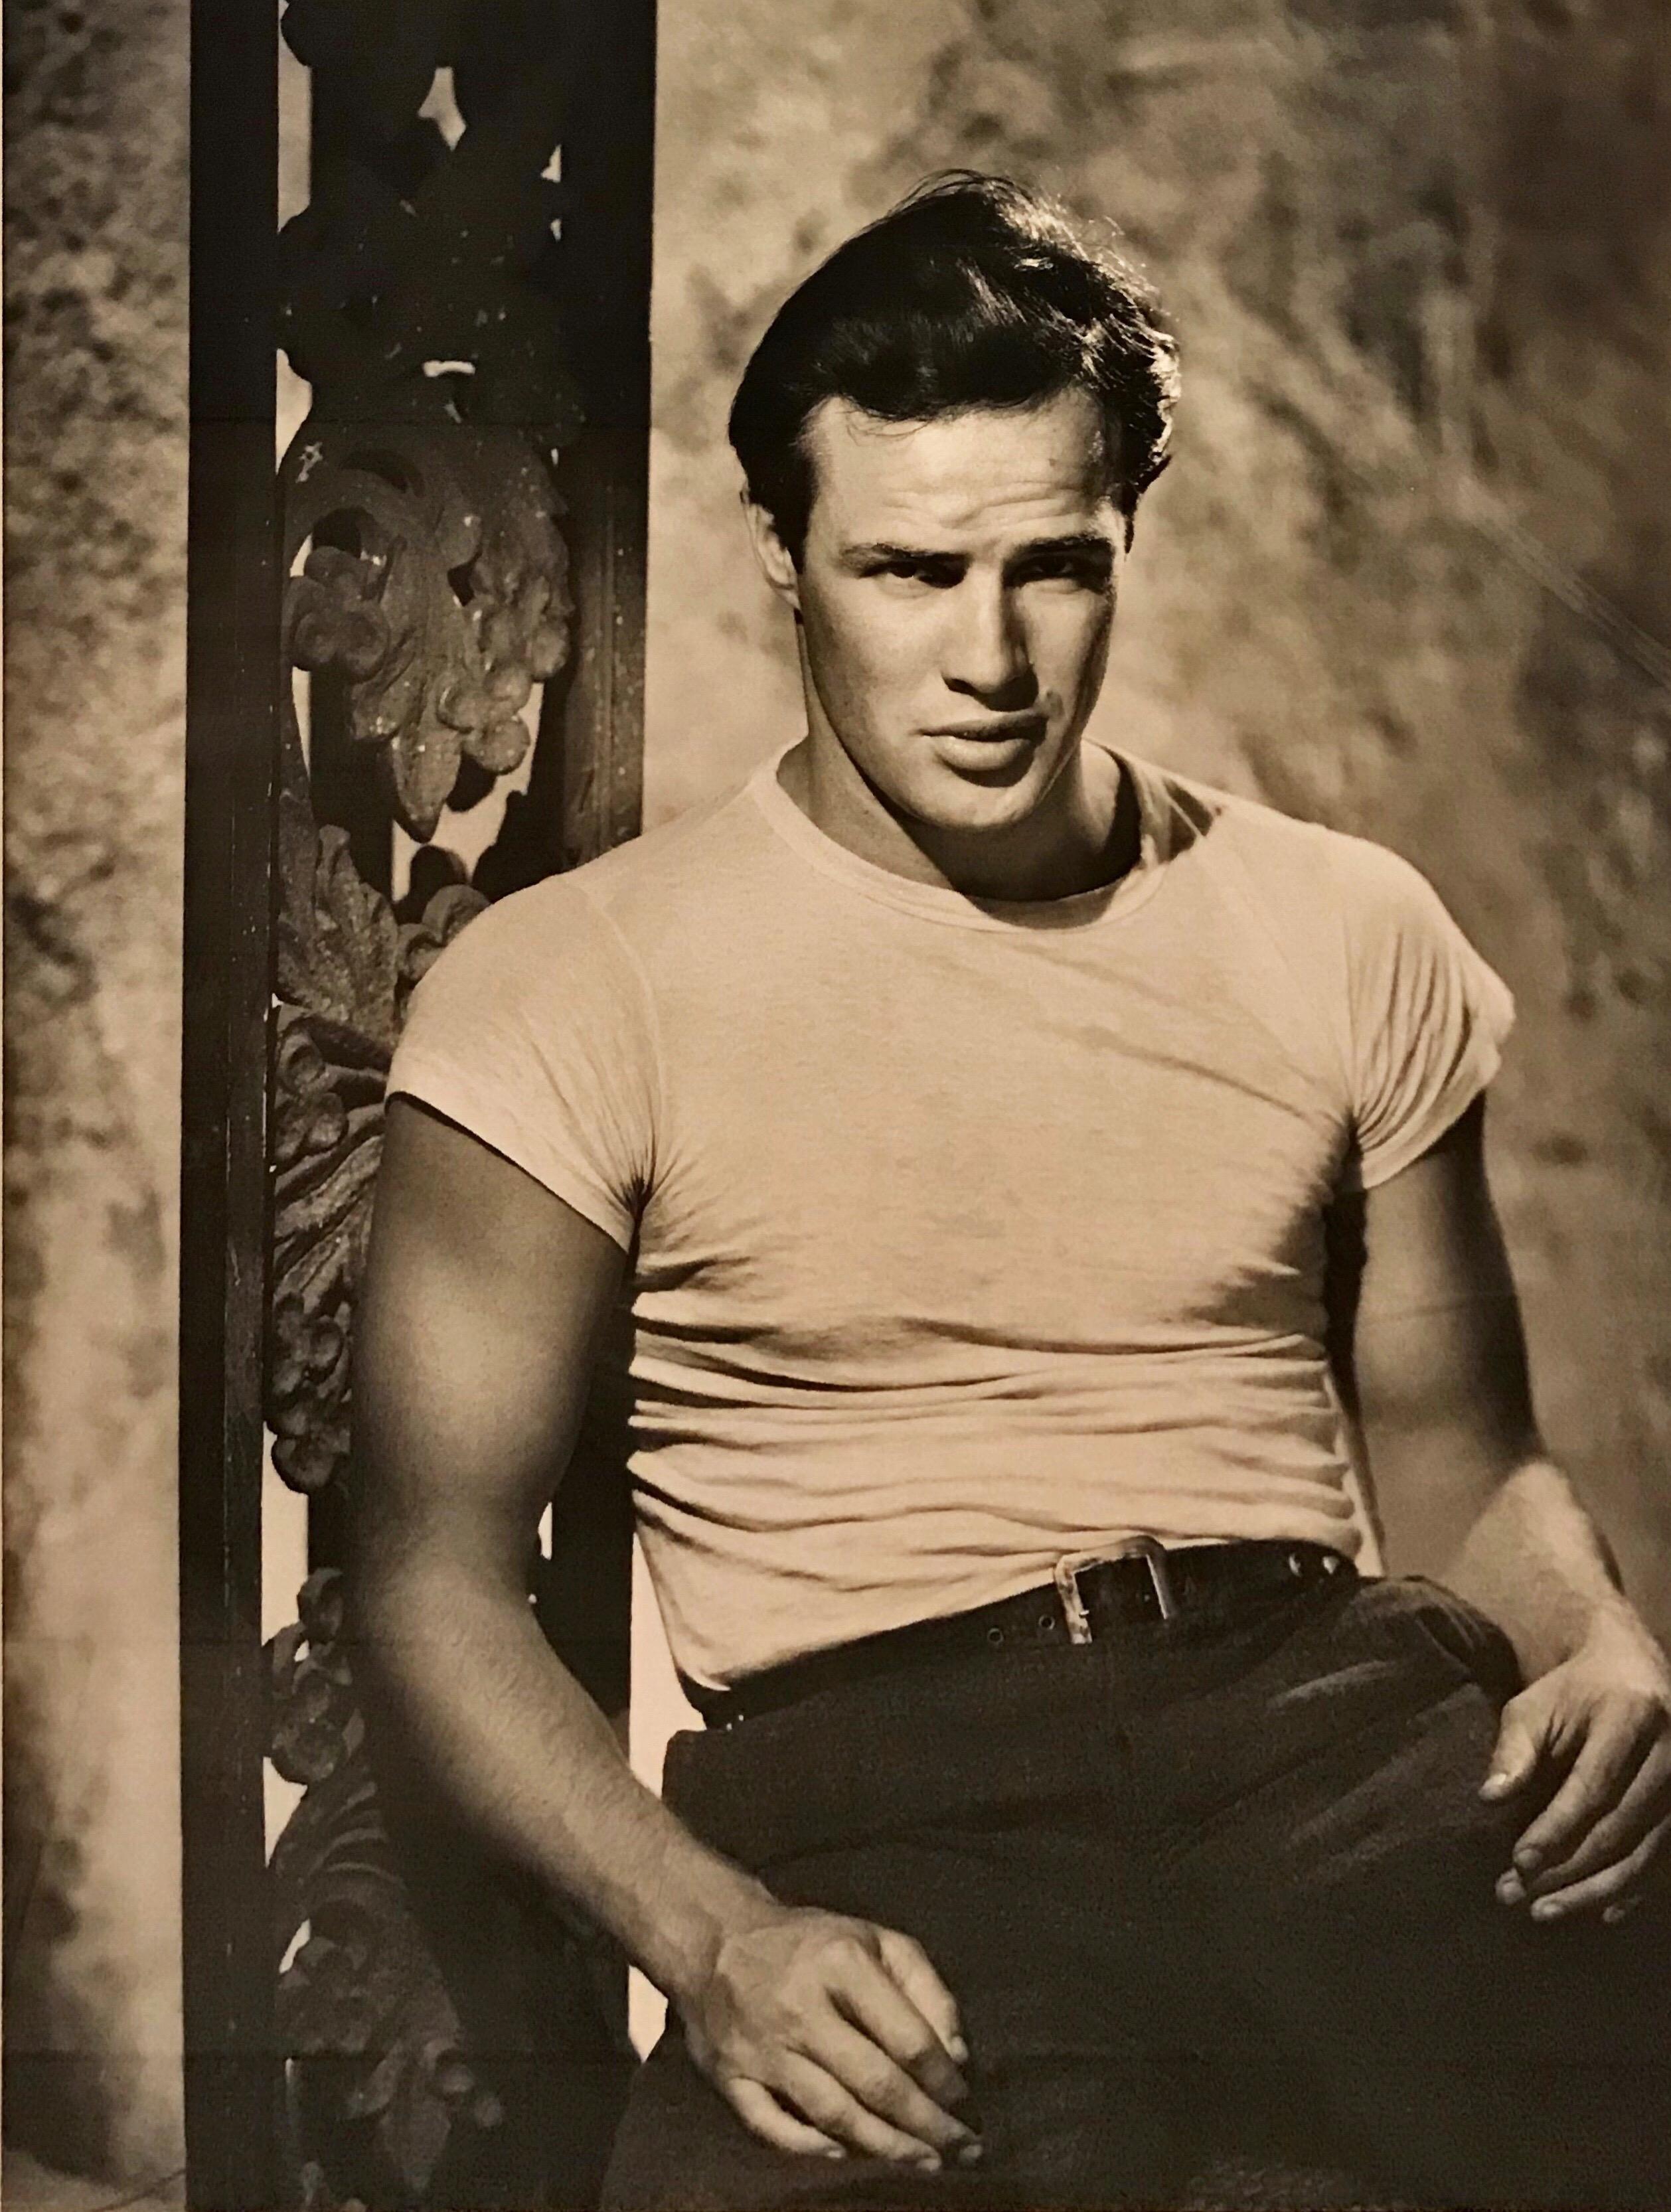 American actor Marlon Brando in character as Stanley Kowalski in the film ‘A Streetcar Named Desire’, directed by Elia Kazan, 1950. 

Photo by John Kobal Foundation

Image size: 63cm x 91cm.